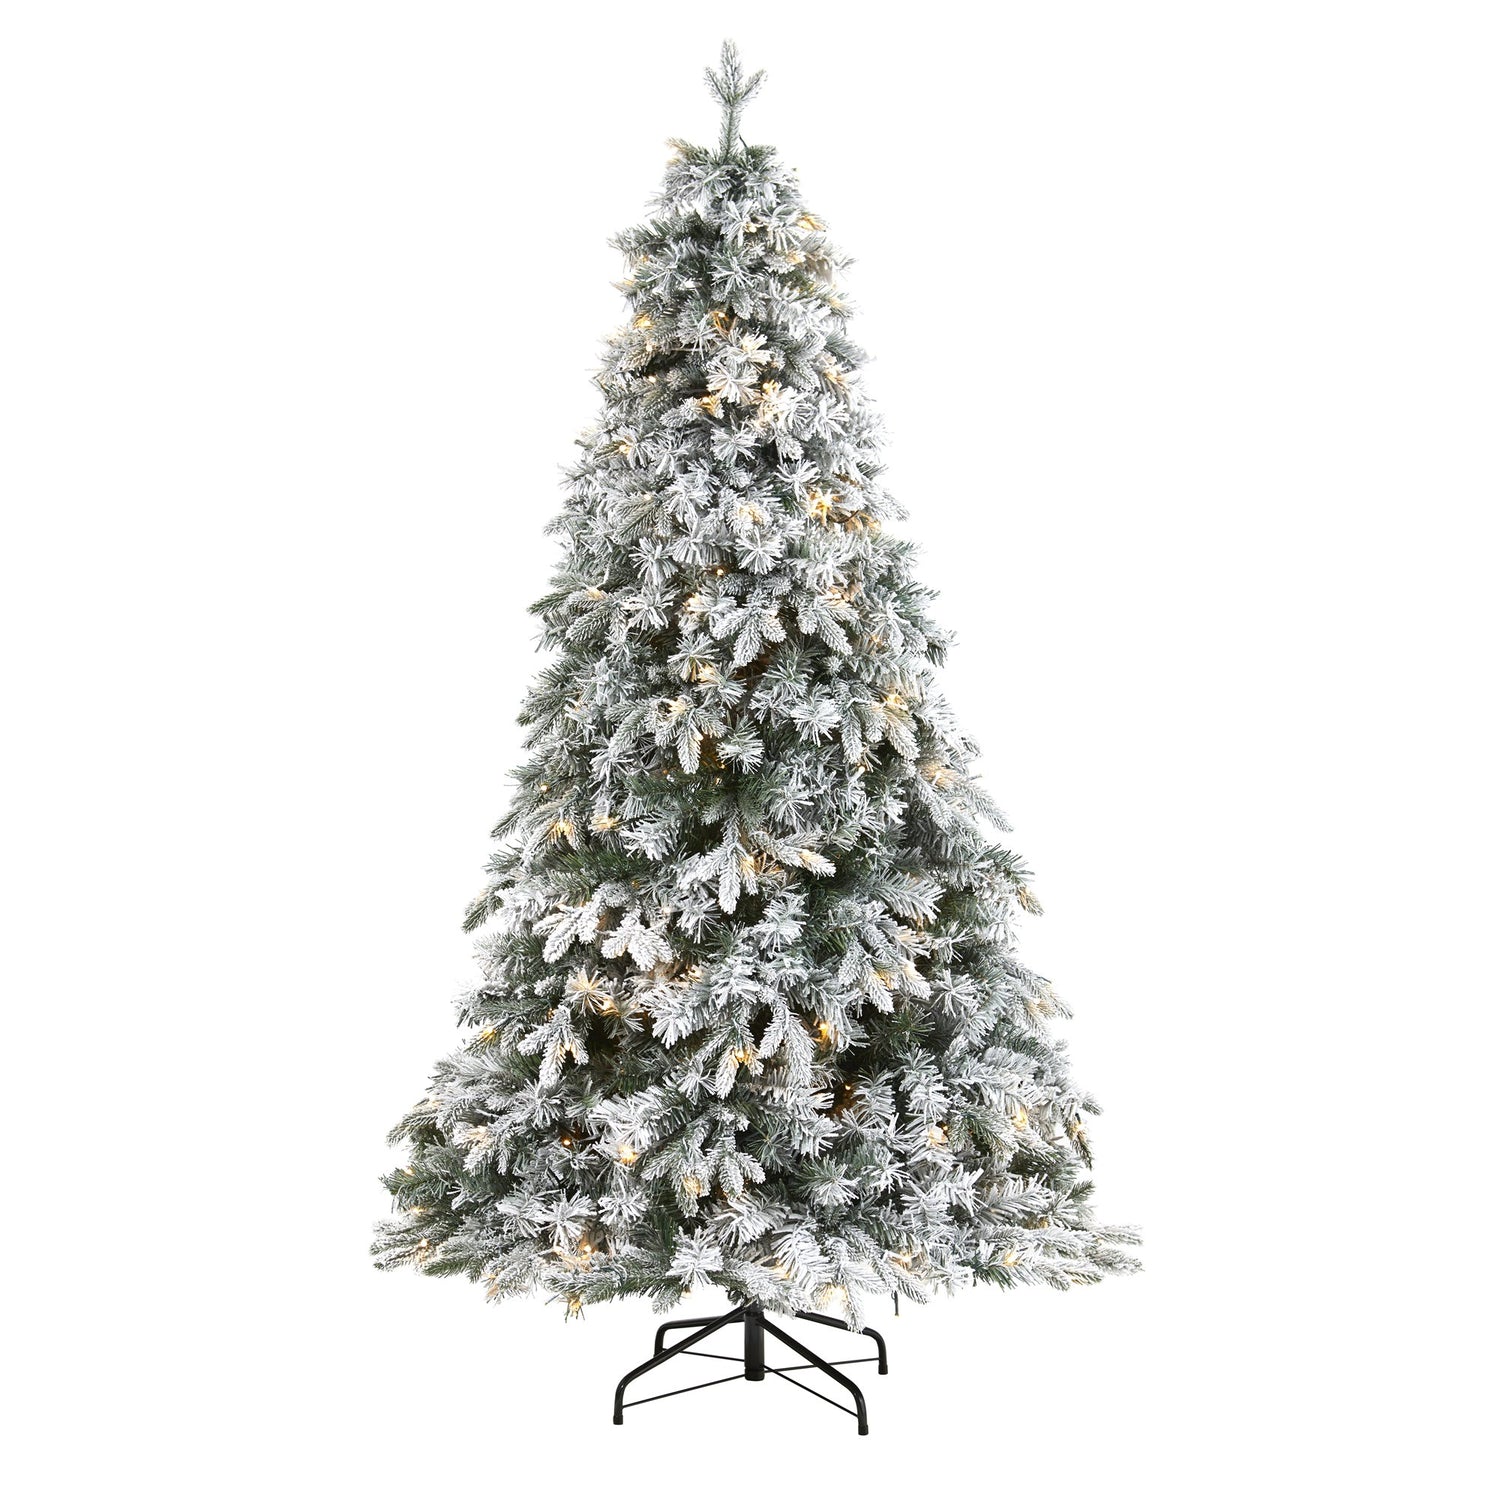 5' Flocked Vermont Mixed Pine Artificial Christmas Tree with 150 Clear LED Lights